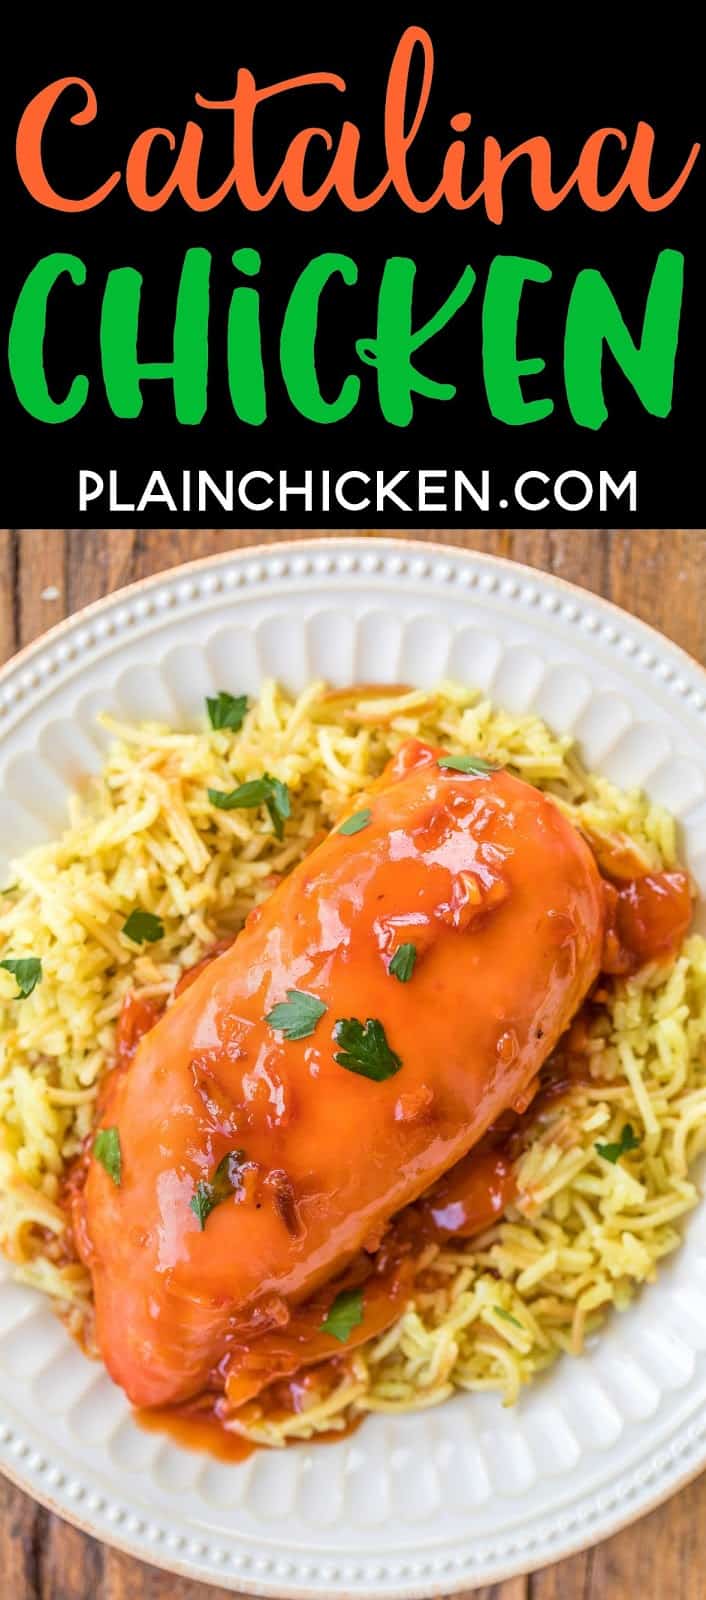 Catalina Chicken - only 4 ingredients!! No prep work! Just toss together and bake. SO easy!! Everyone LOVED this easy weeknight chicken dish. Easy to double the recipe for a crowd. Serve with rice, potatoes or noodles. A real crowd pleaser!